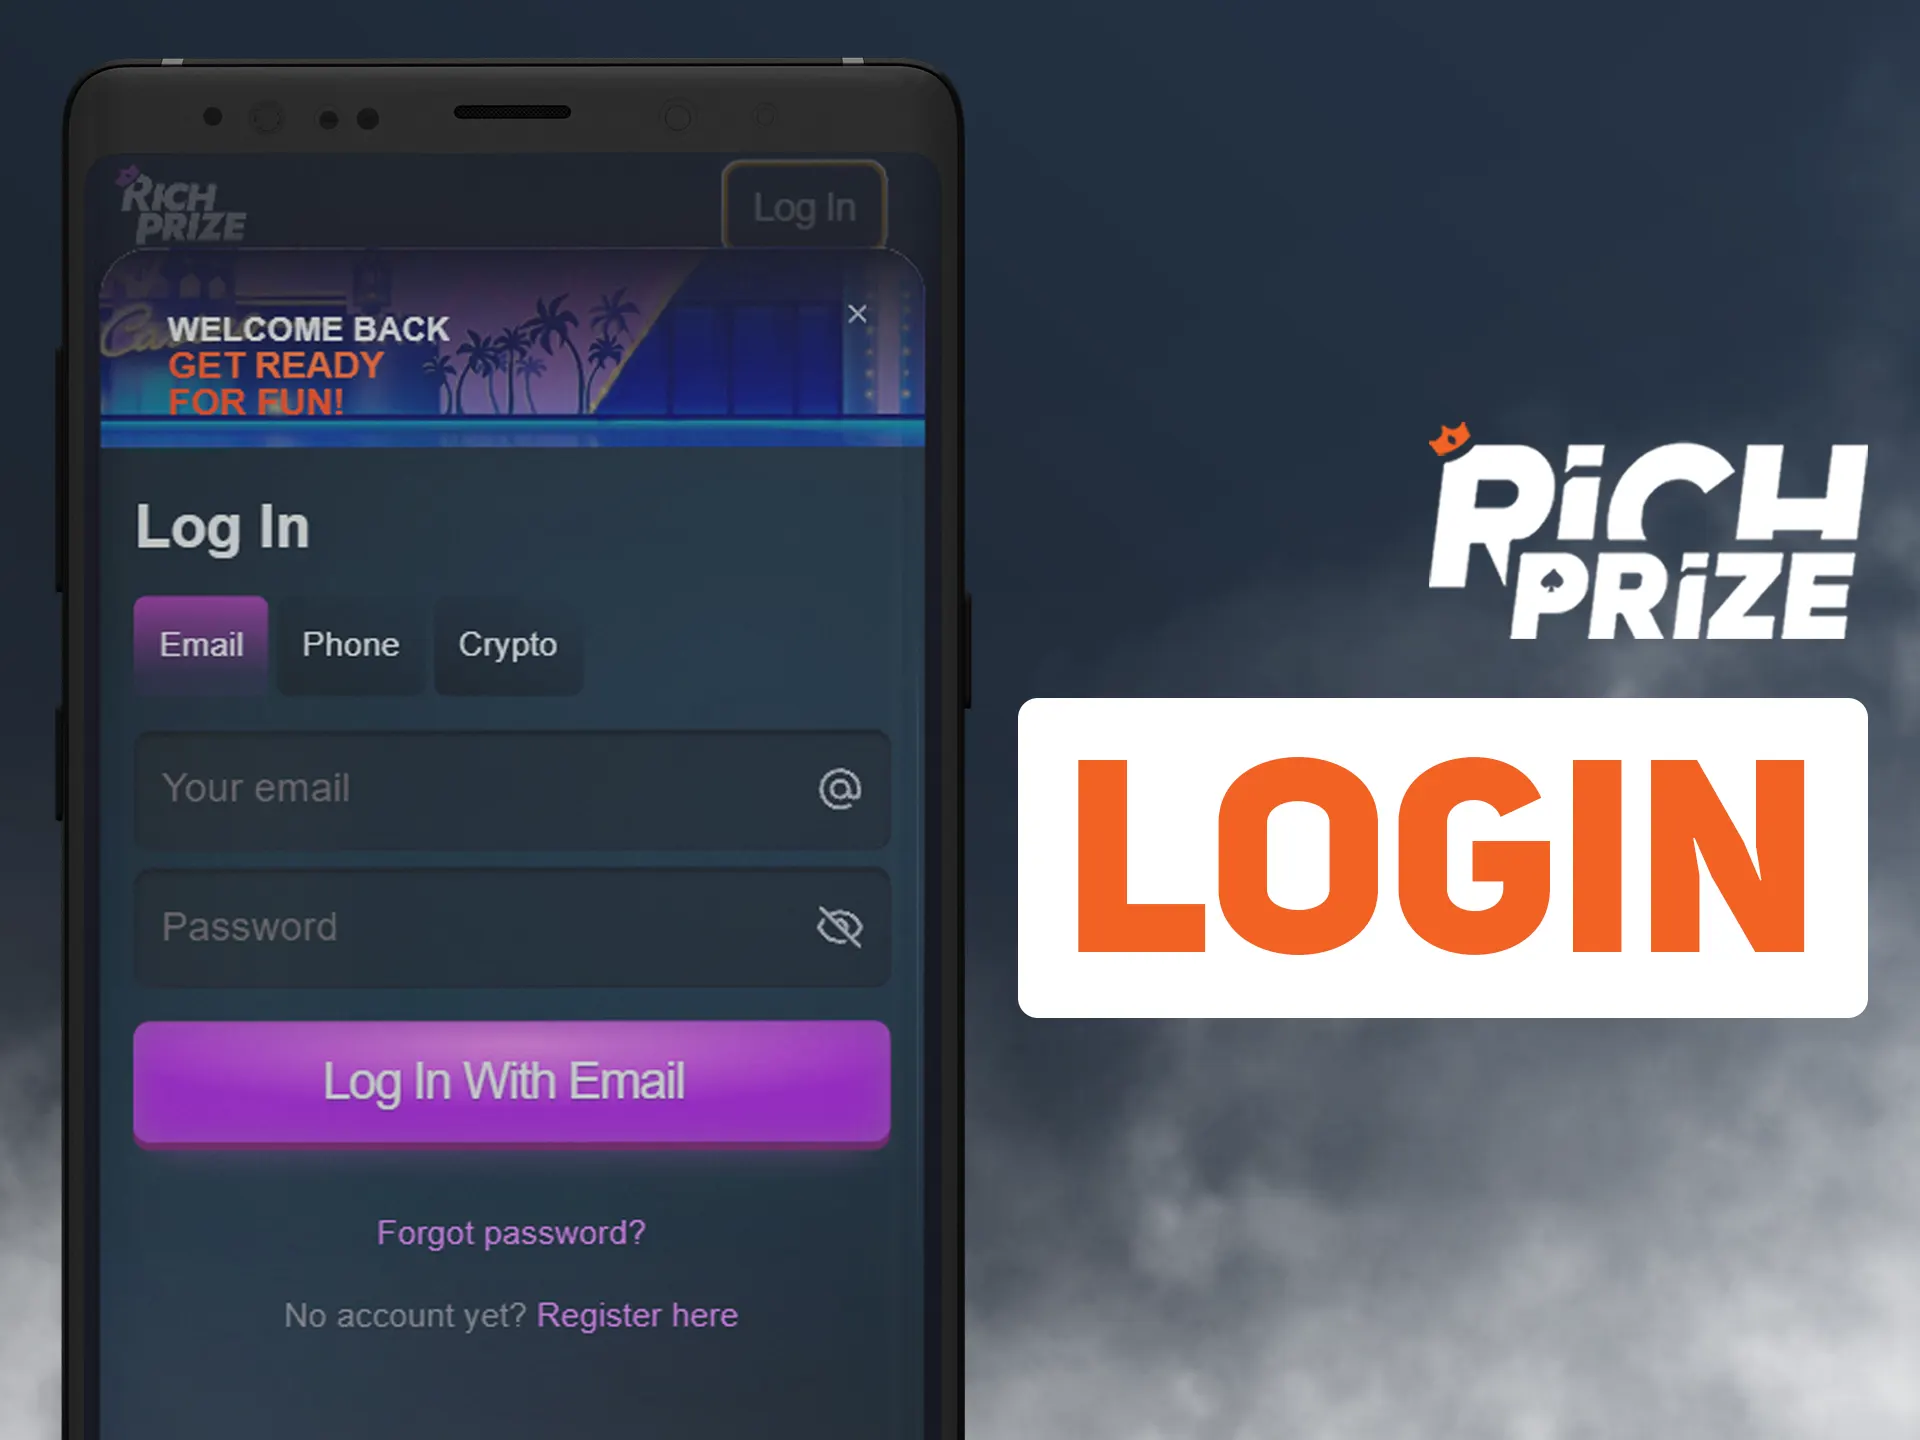 Click on log in button and enter using your Richprize account.